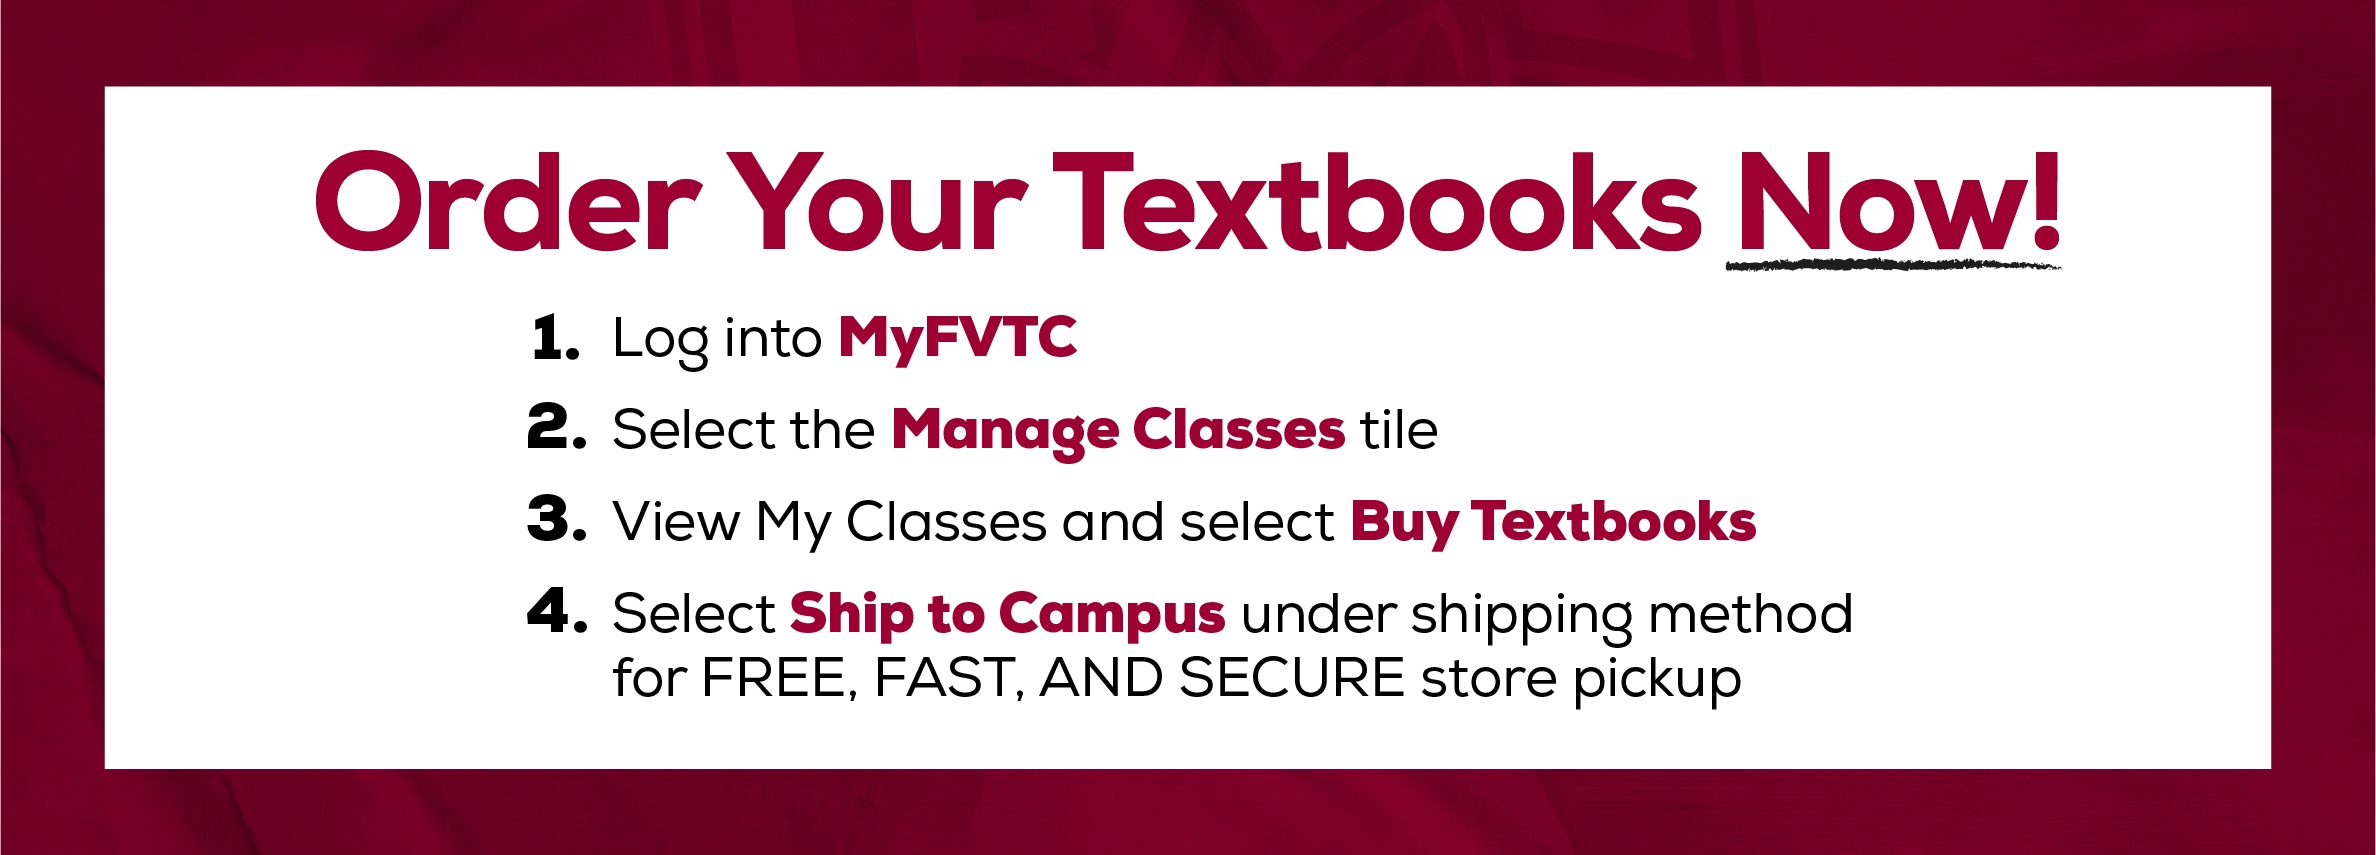 Order your textbooks now! 1. Log into MyFVTC. 2. Select the Manage Classes tile. 3. View My Classes and select Buy Textbooks. 4. Select Ship to Campus under shipping method for Free, Fast, and secure store pickup (new tab)